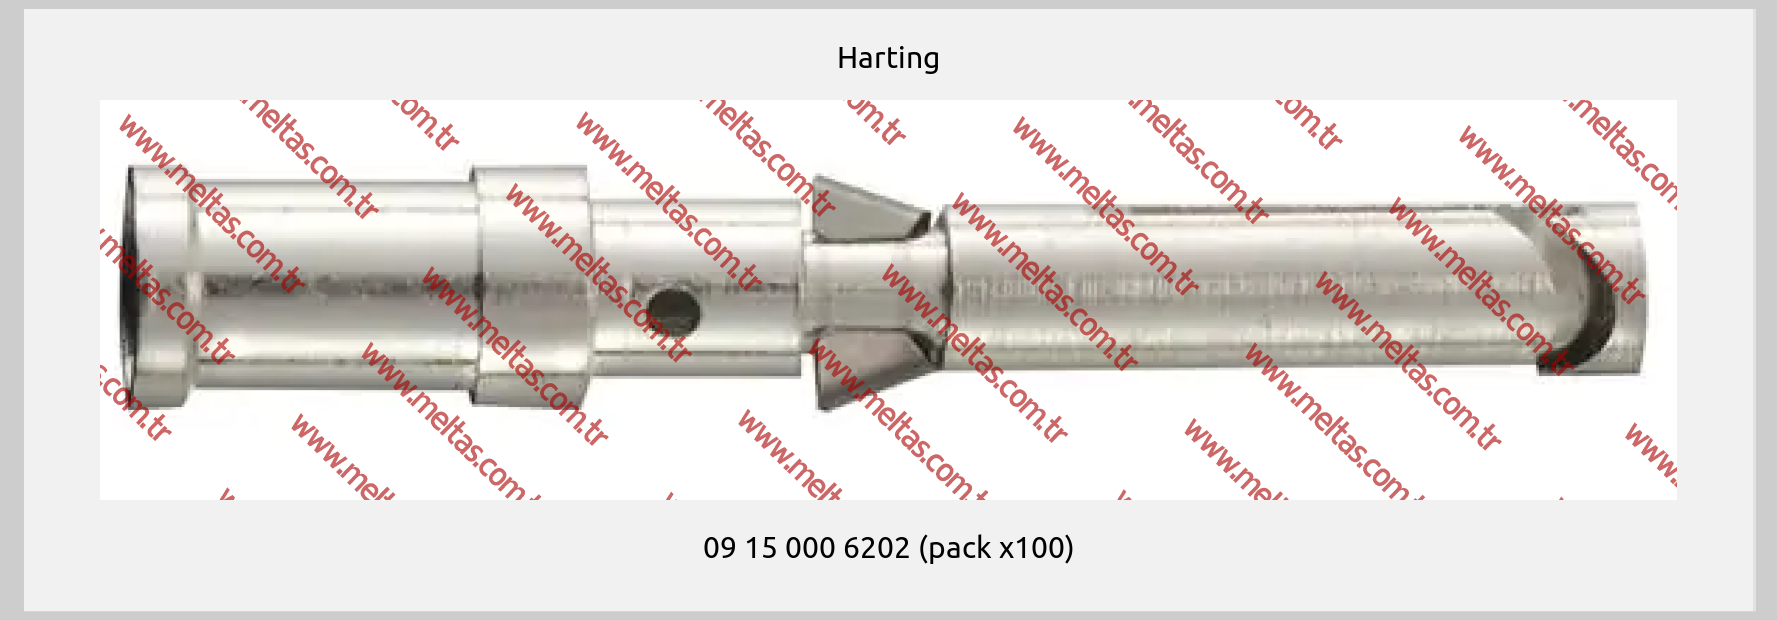 Harting - 09 15 000 6202 (pack x100)